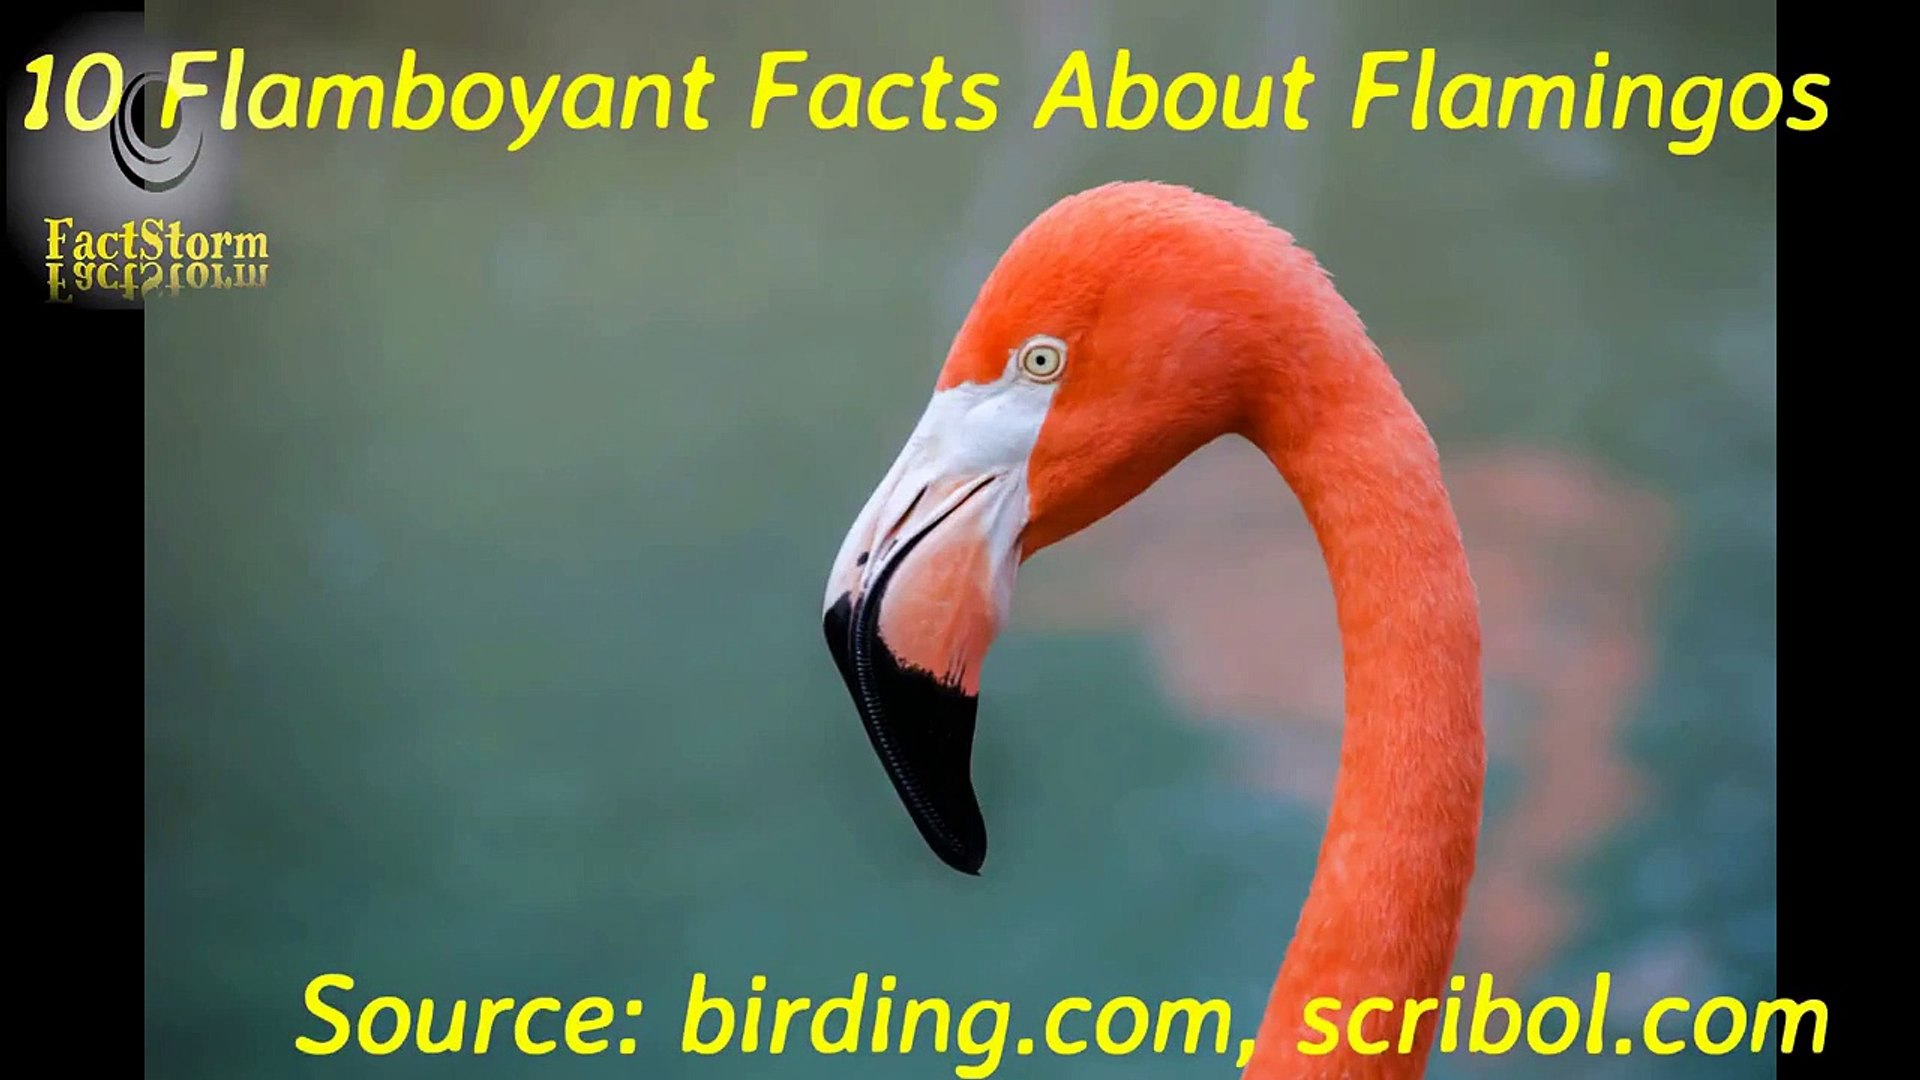 10 Flamboyant Facts About Flamingos